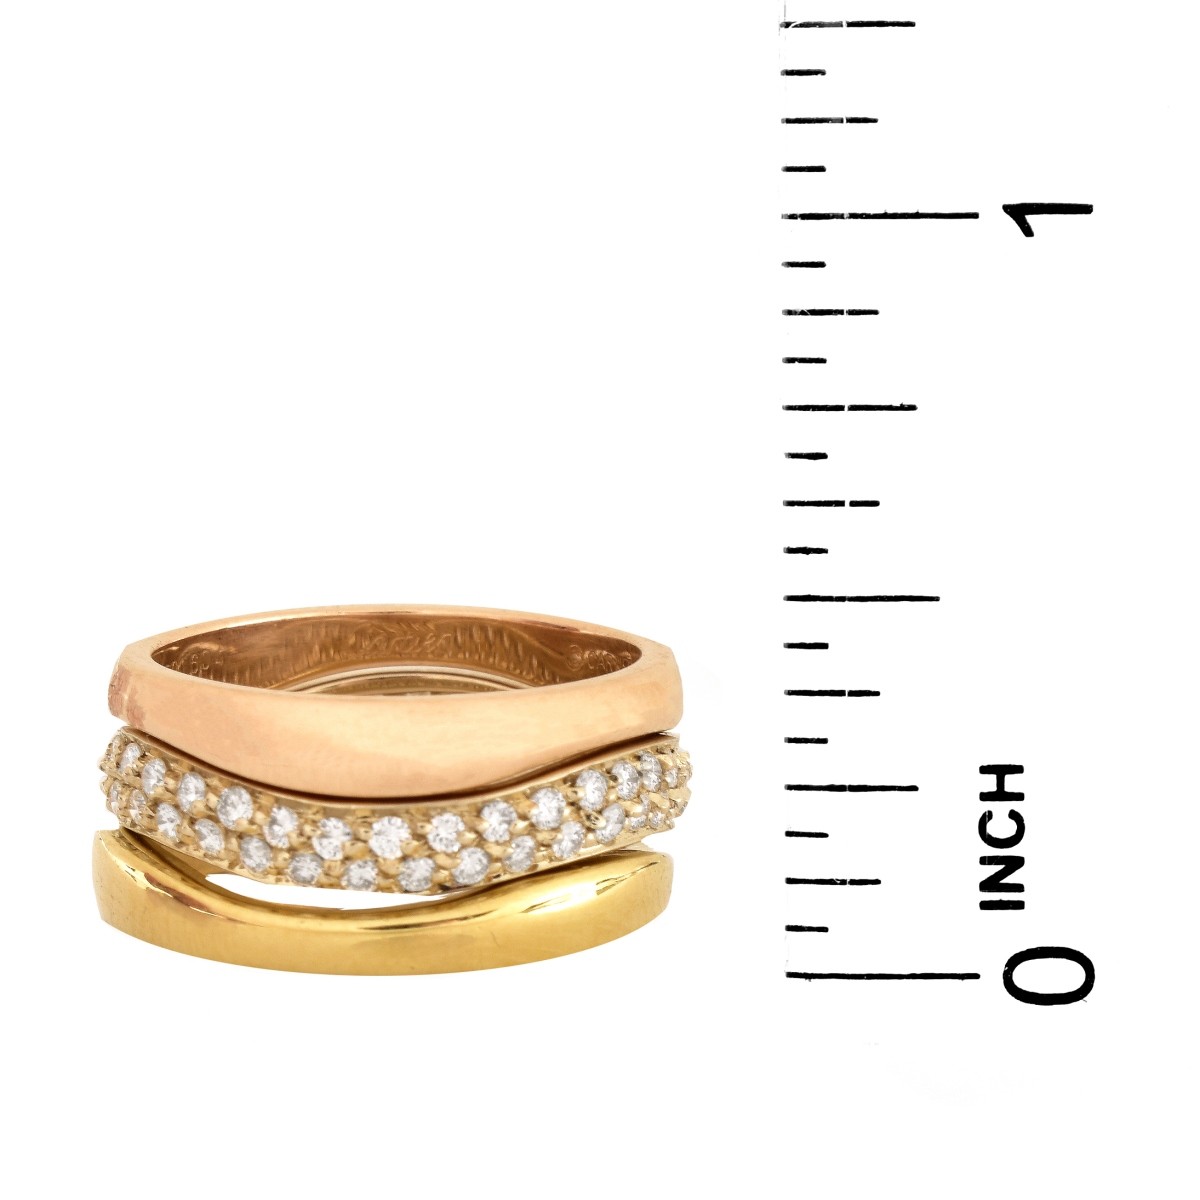 Cartier Diamond and 18K Gold Eternity Bands